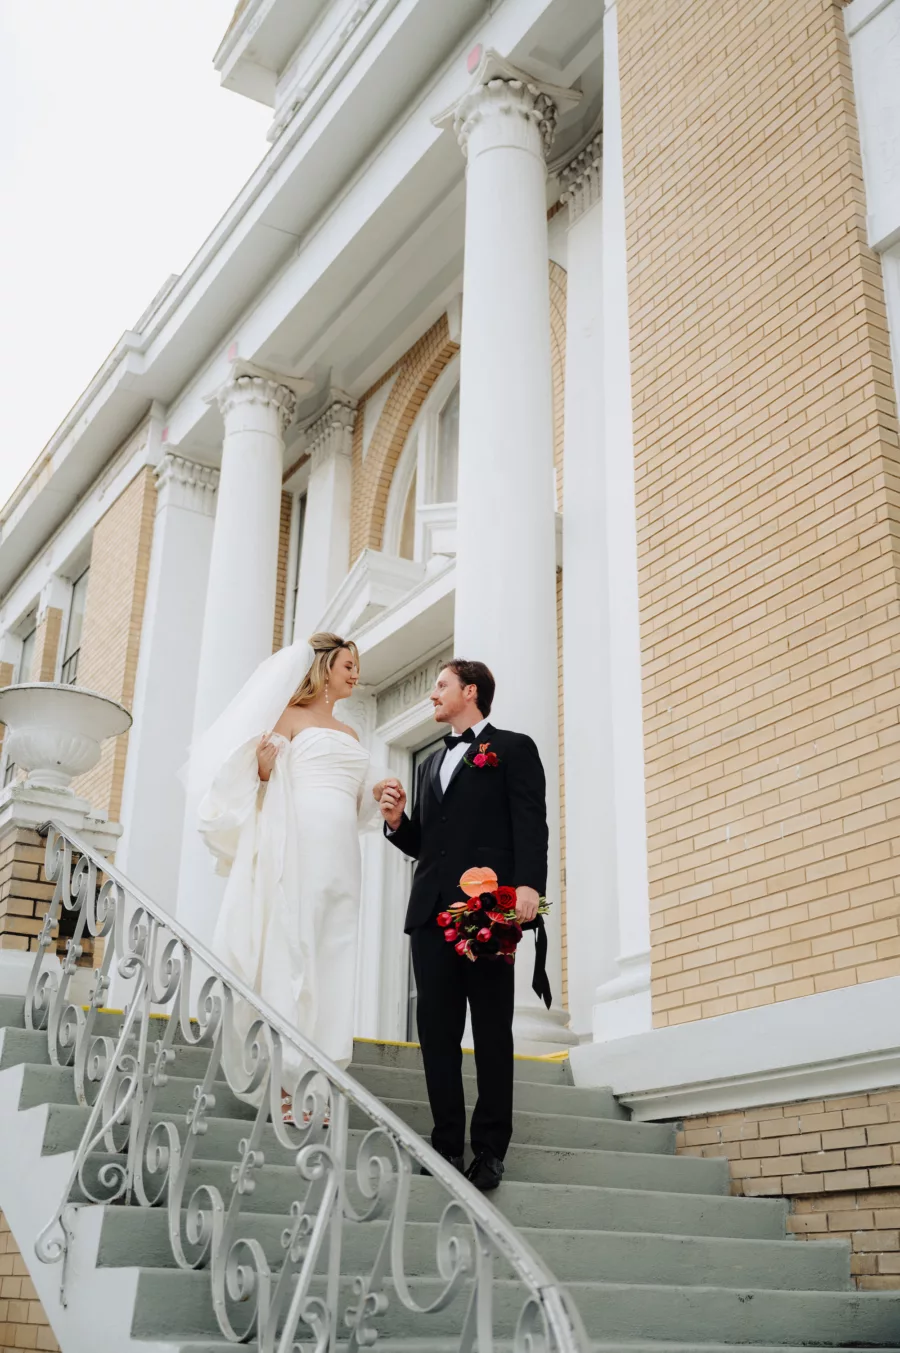 Bride and Groom Walking Down Stairs Wedding Portrait | Historic Ybor Event Venue Cuban Club | Tampa Bay Photographer McNeile Photography | Content Creator Behind The Vows